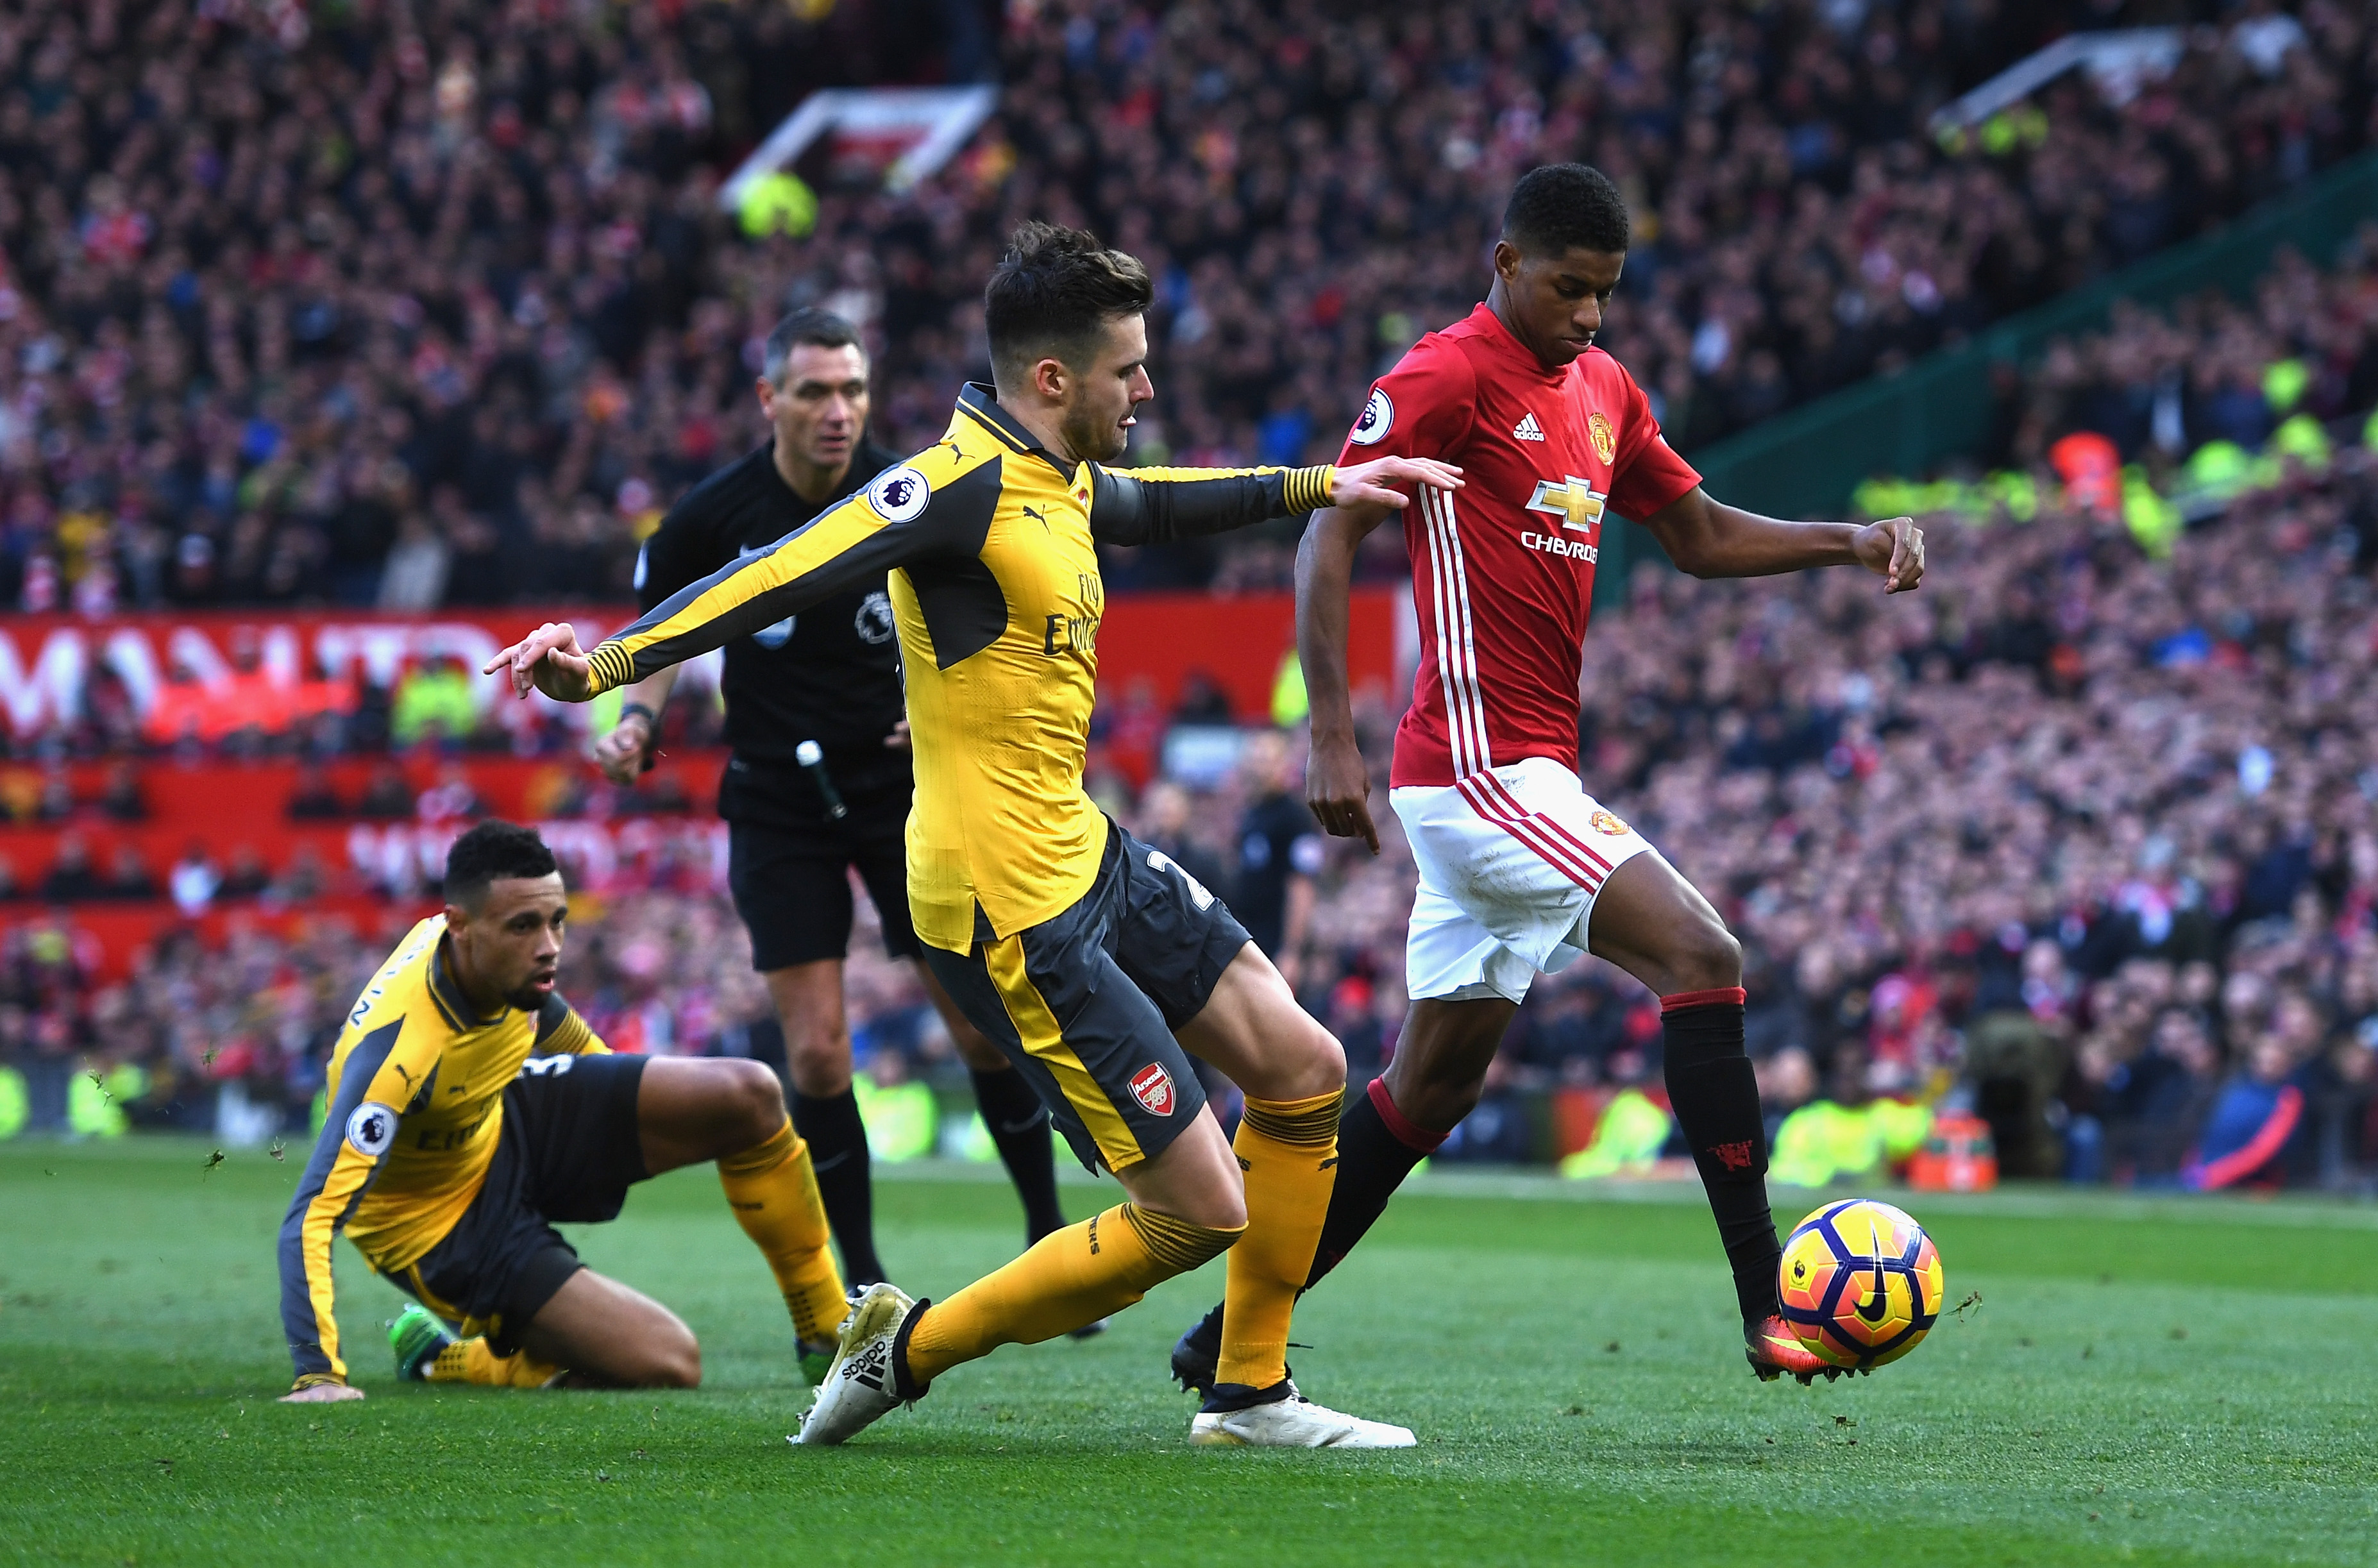 Arsenal vs. Manchester United Highlights and recap